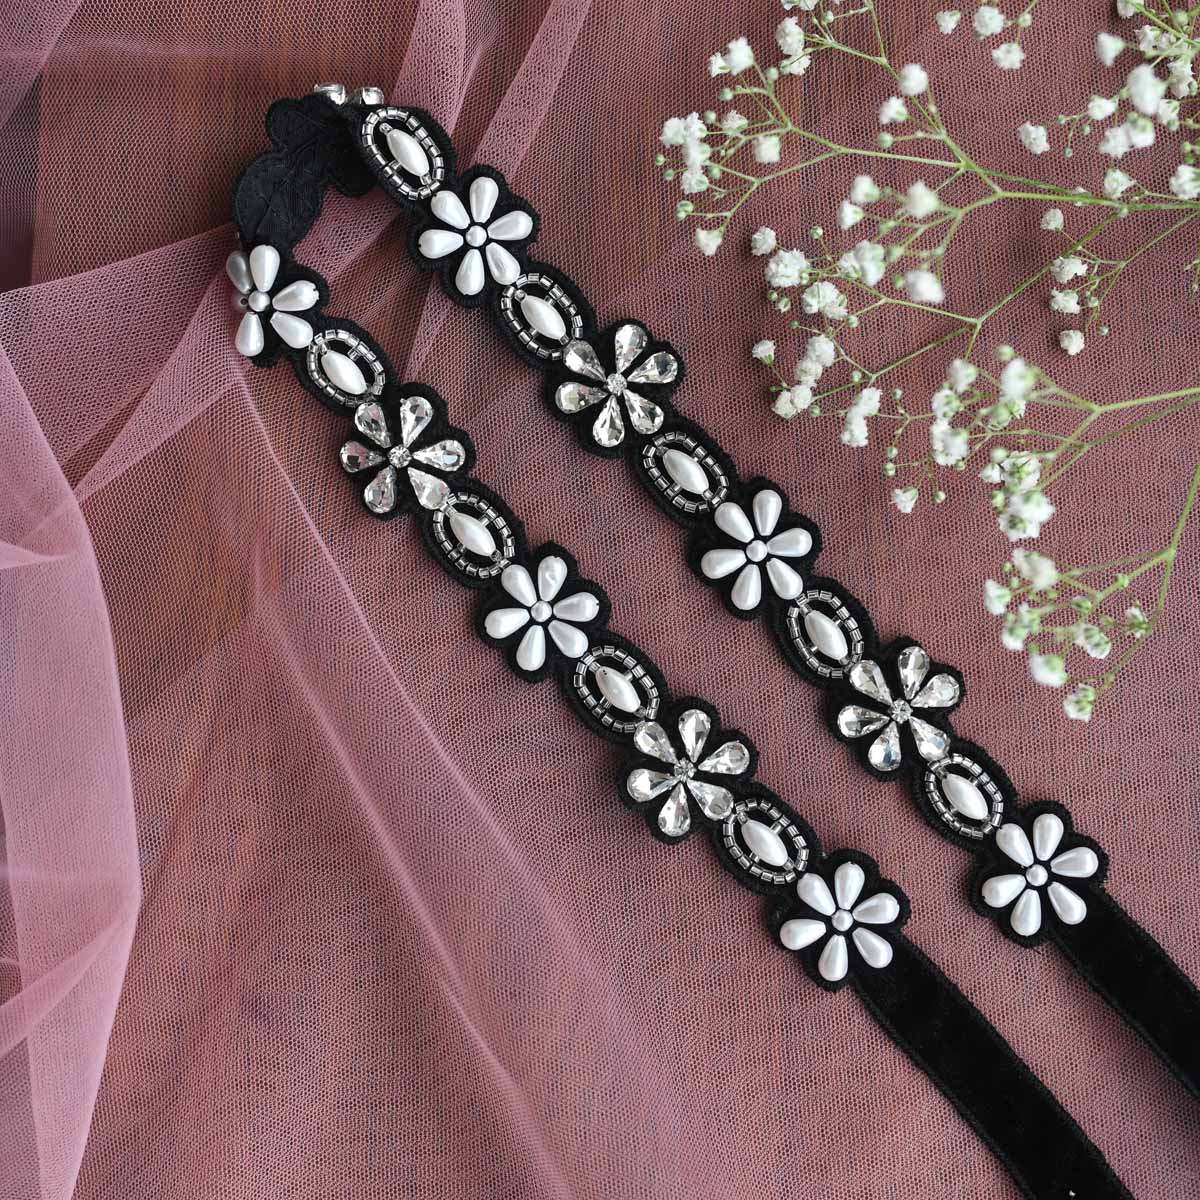 Embroidered Tie up Headband with alternating Pearl and Crystal Flowers